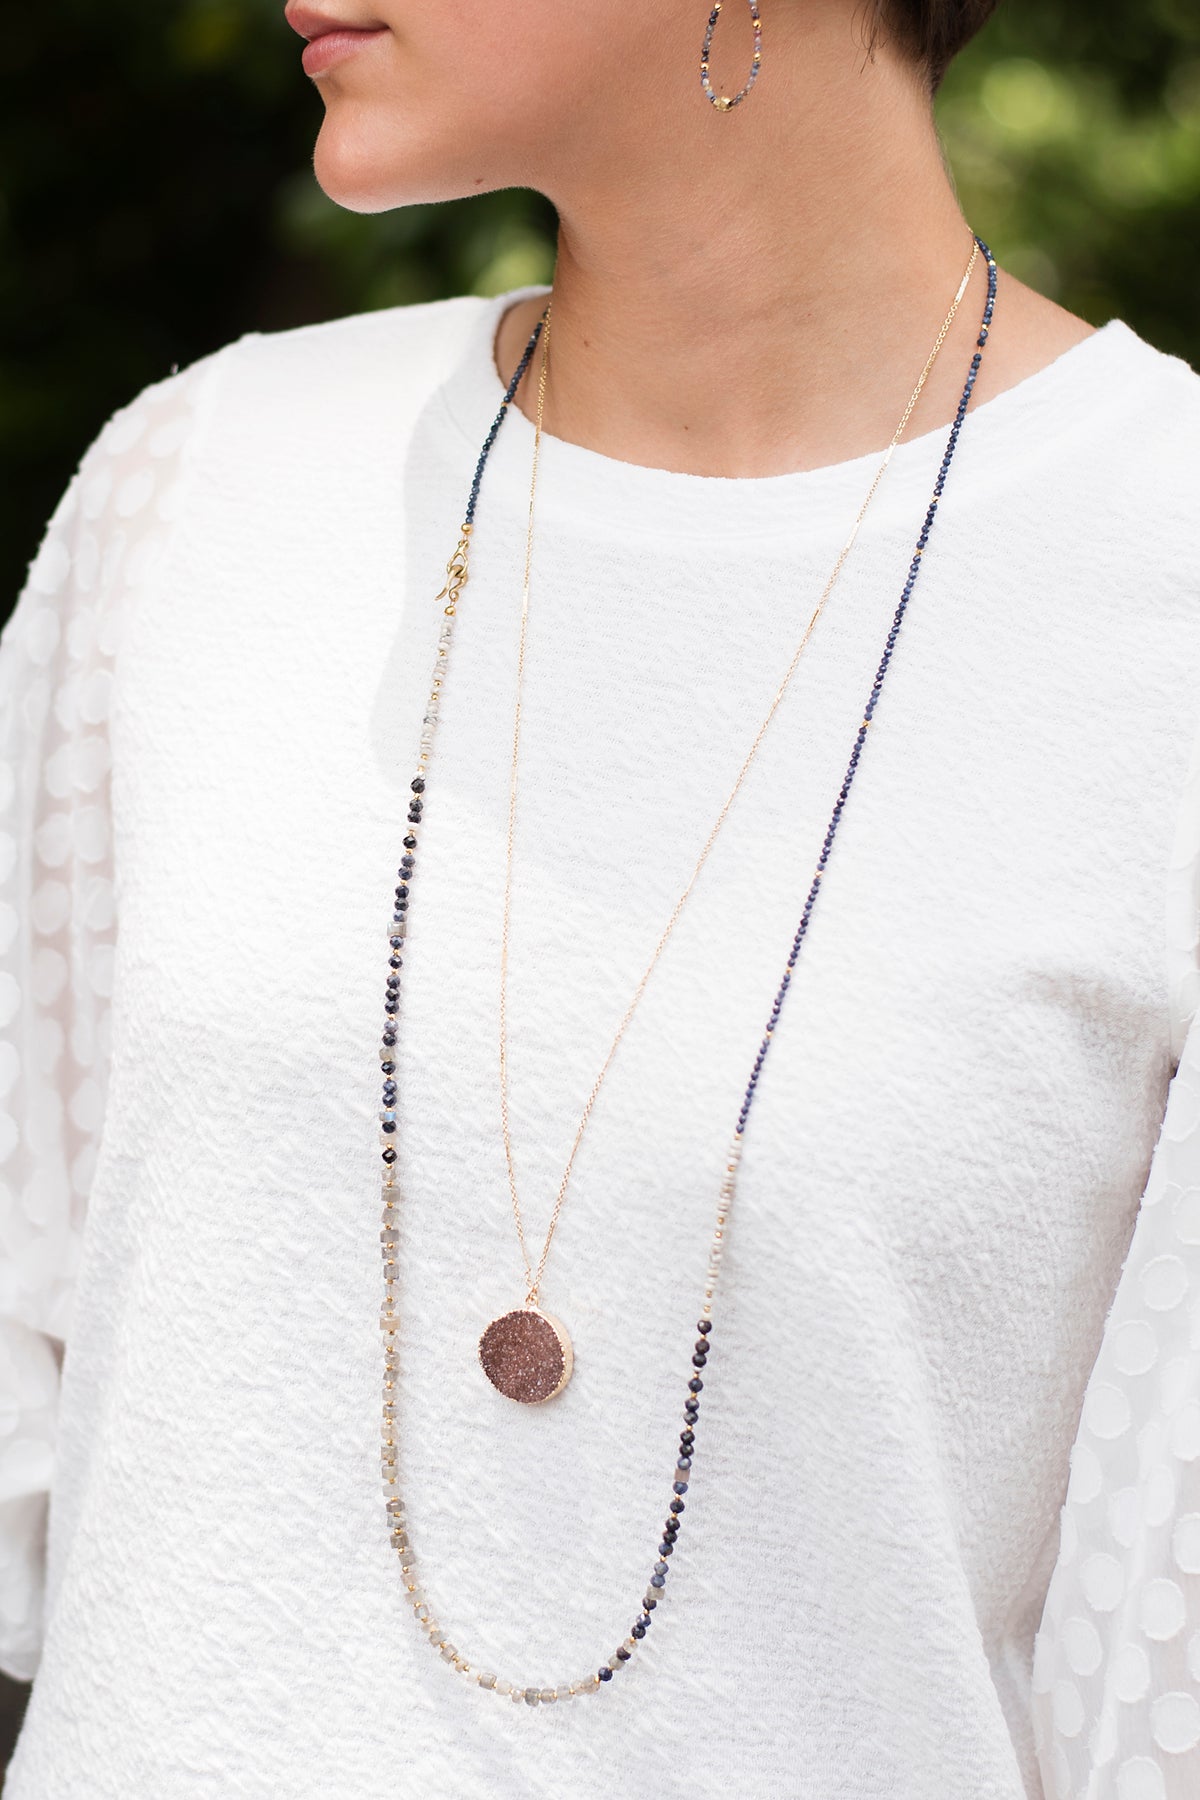 Large Round Druzy Necklace with Gold